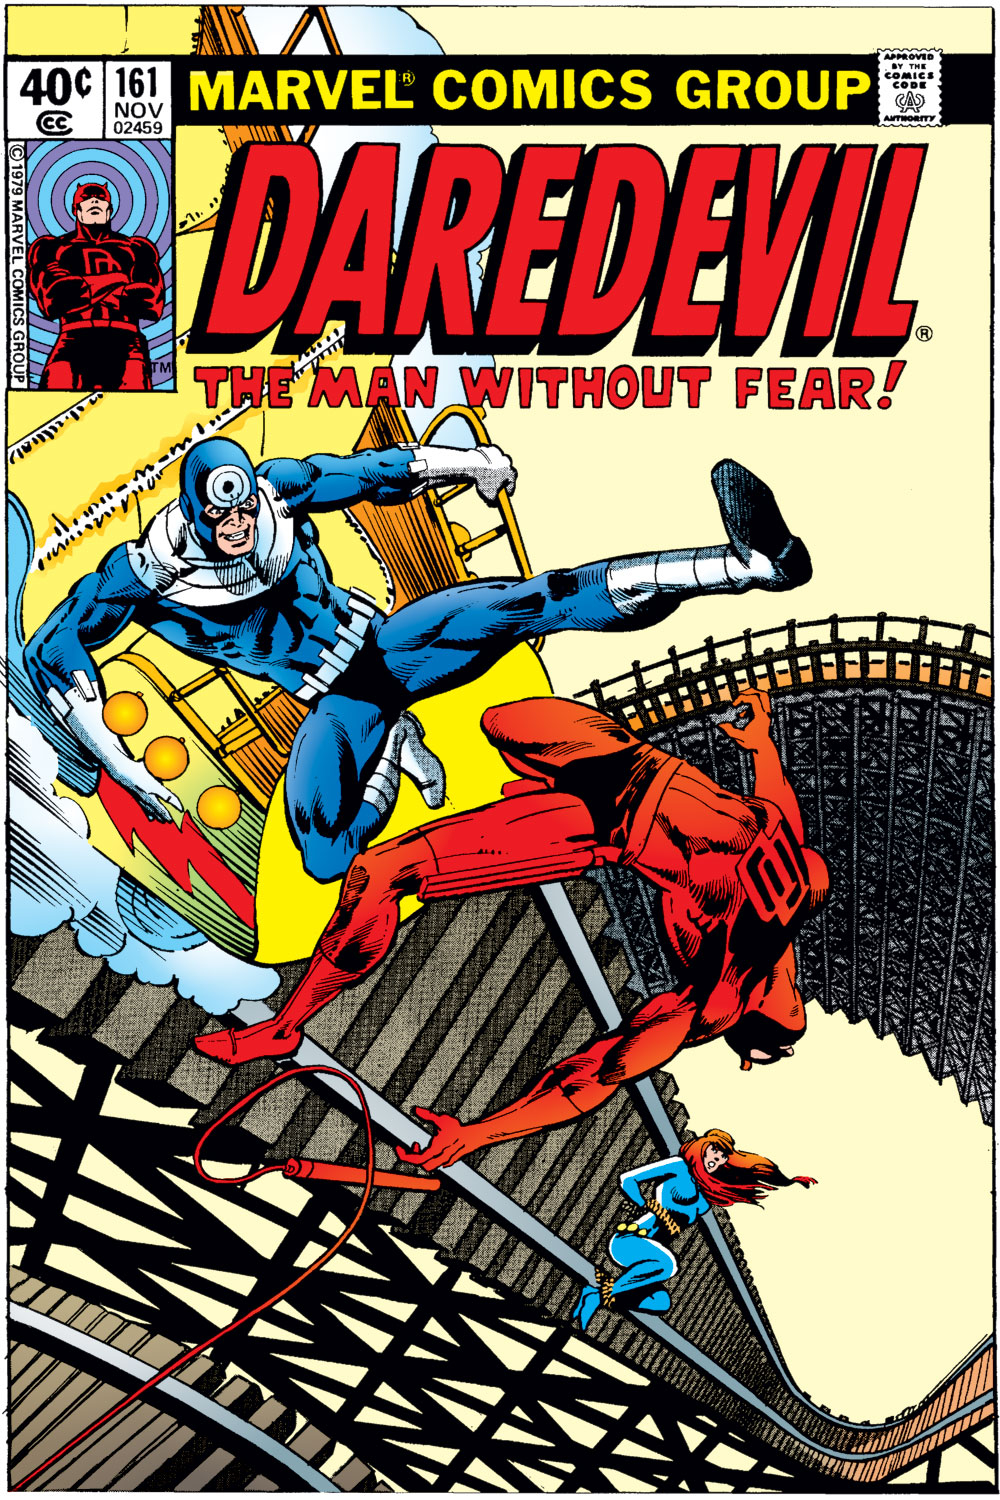 Daredevil The Man Without Fear! Vol. 1 Issue #161 "To Dare the Devil" (1979), Marvel Comics. Words by Roger McKenzie. Art by Frank Miller, Klaus Janson, and Glynis Wein